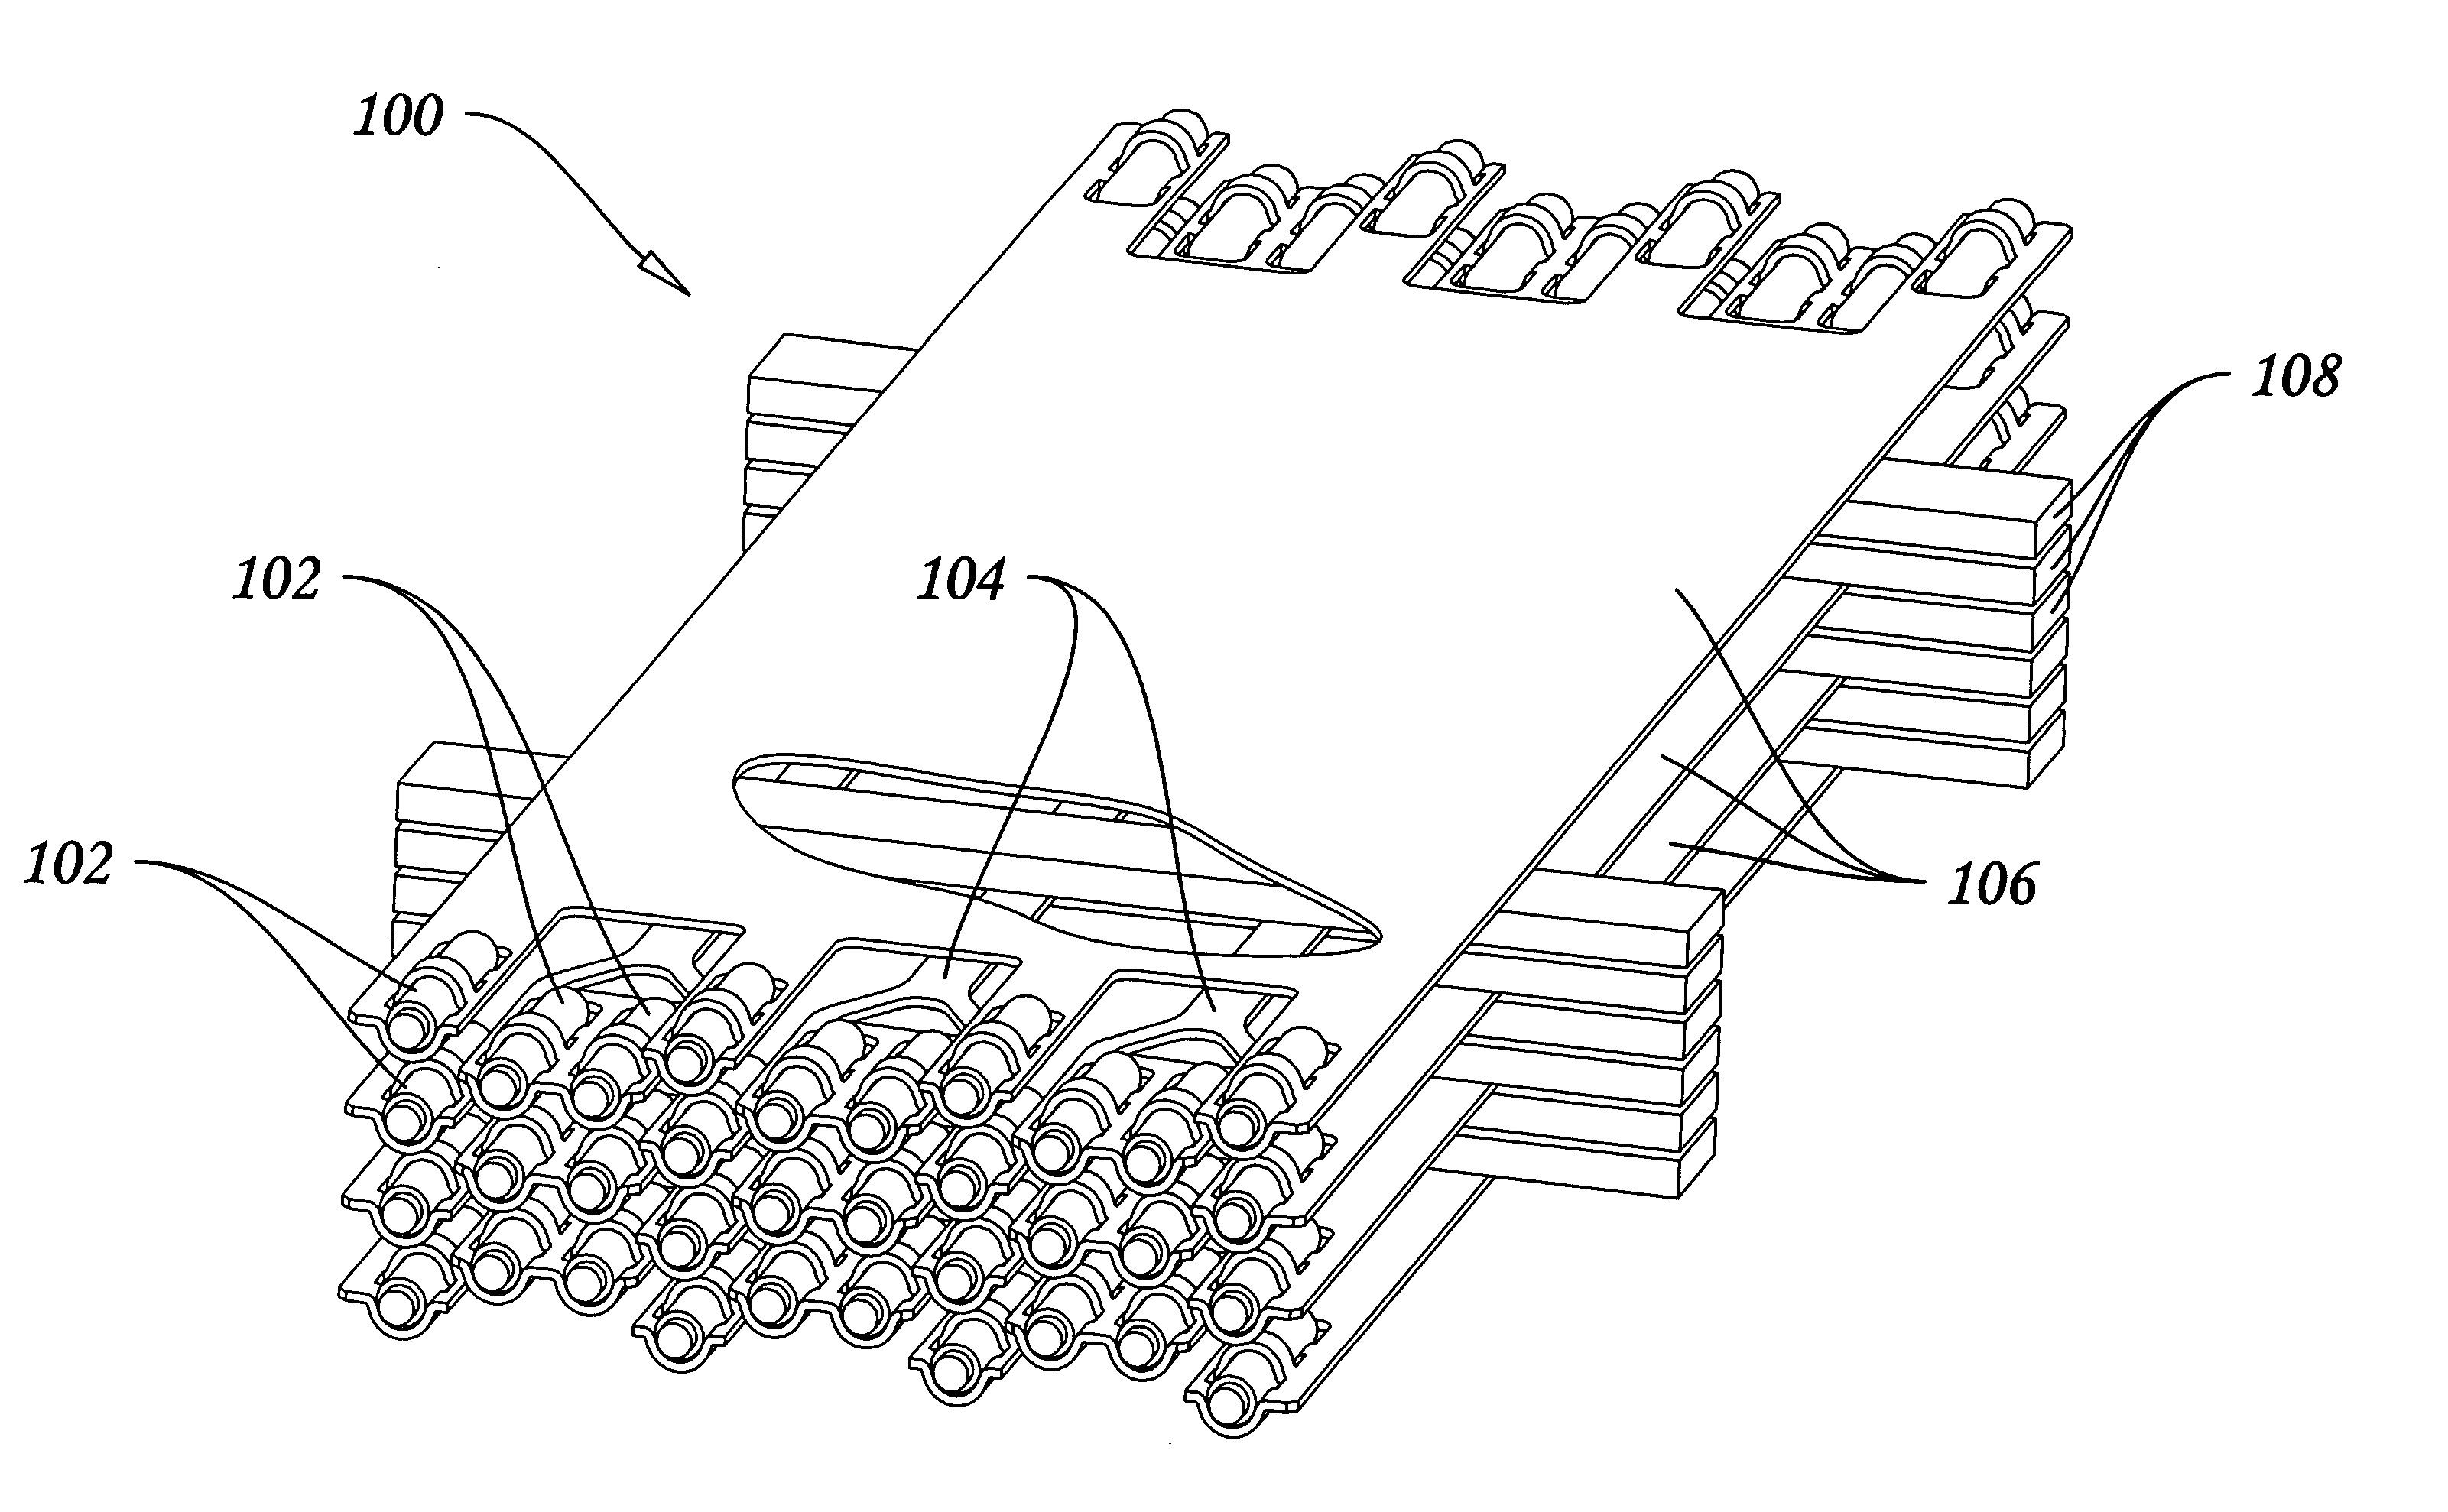 Contact signal blocks for transmission of high-speed signals